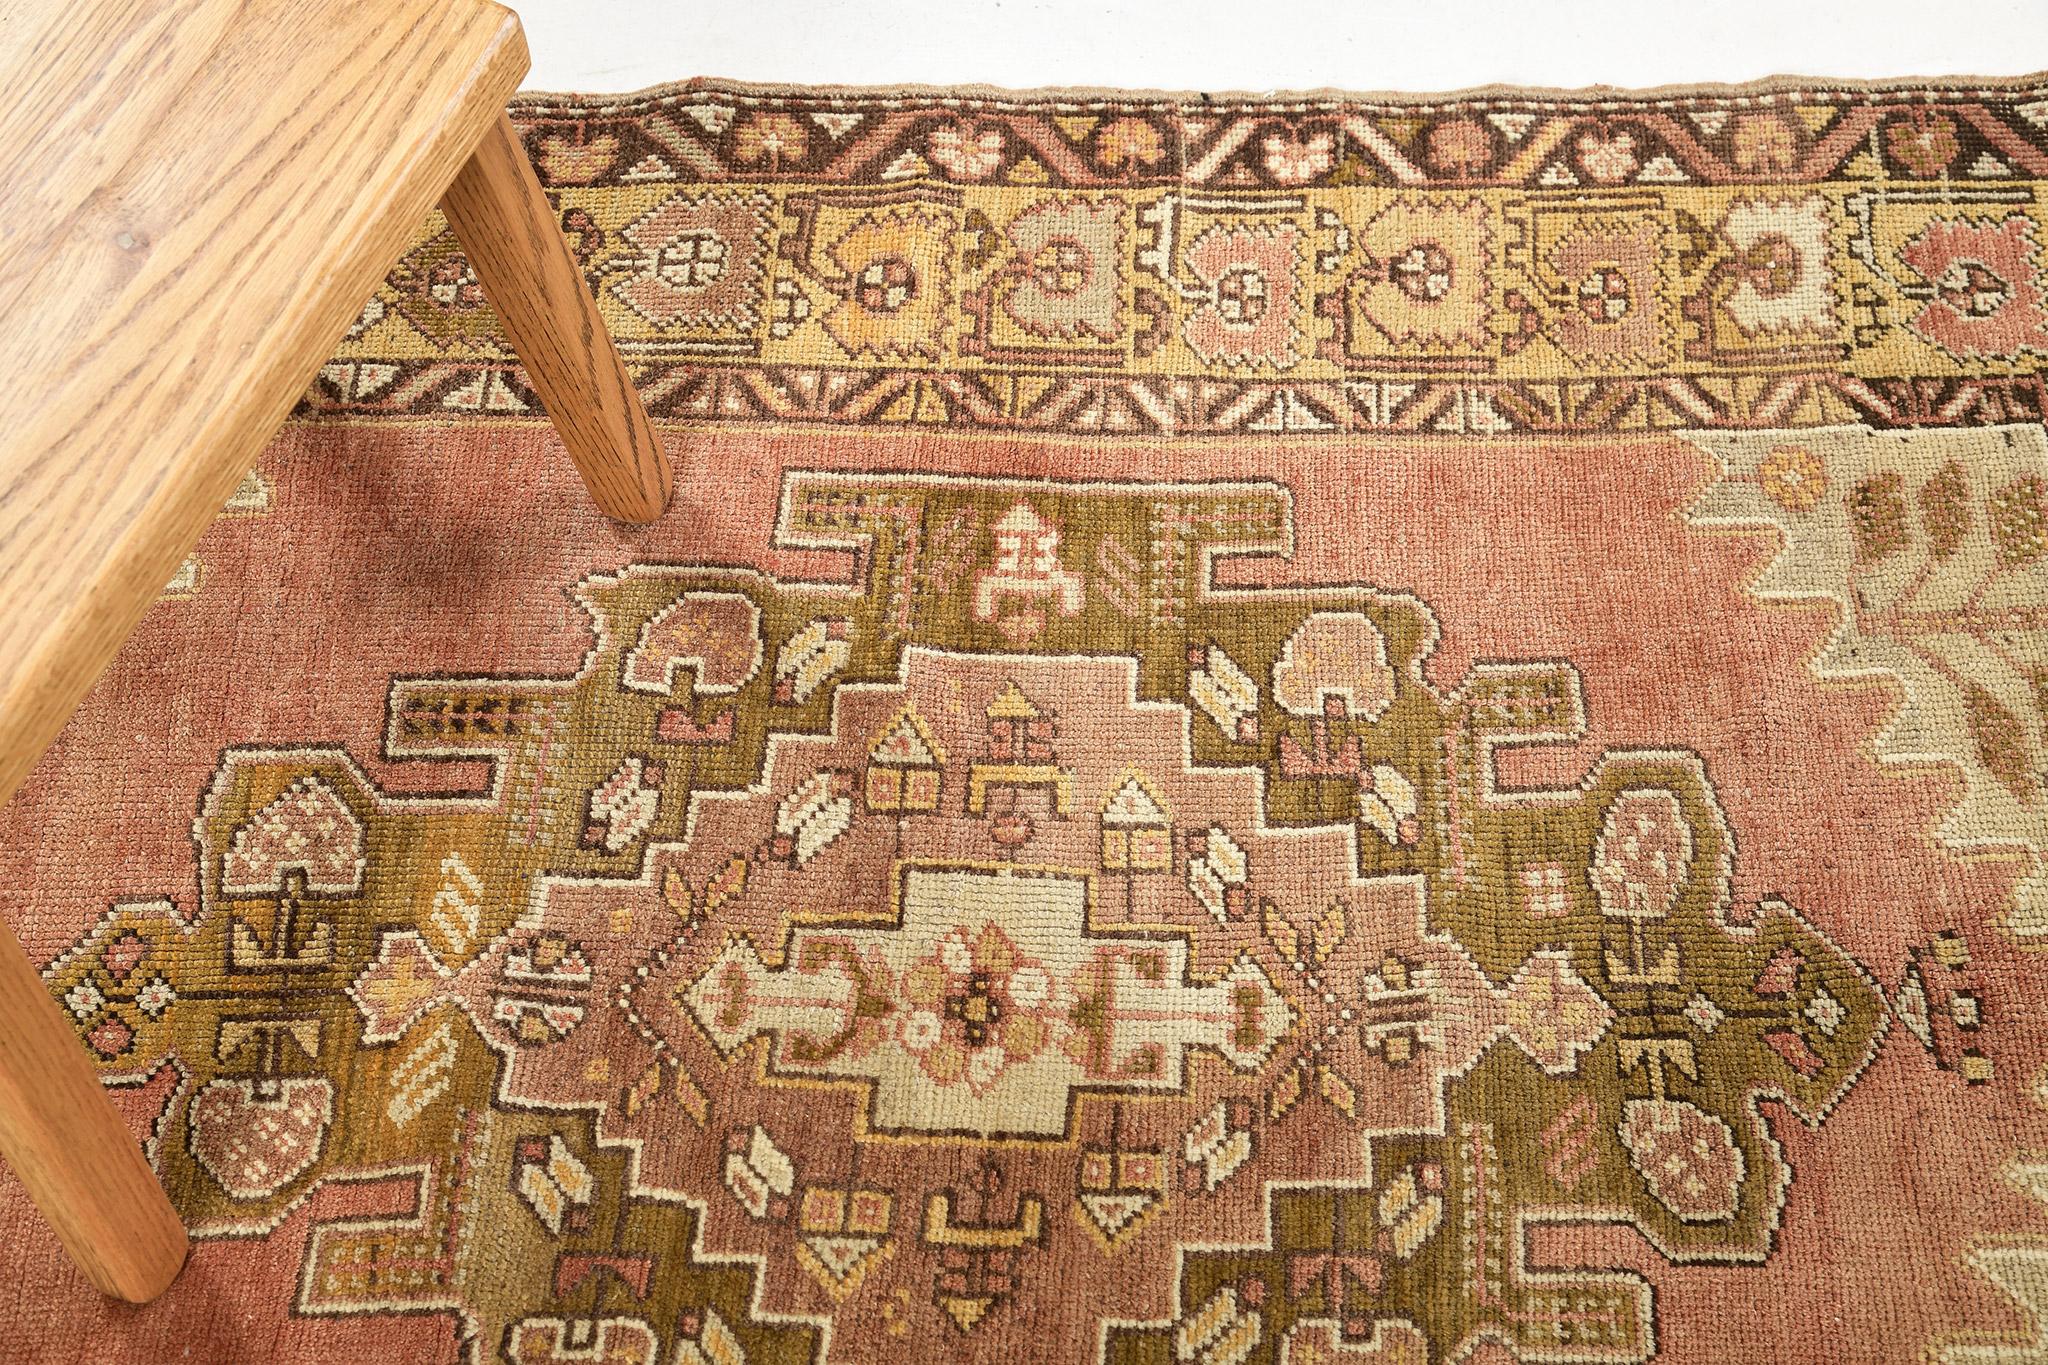 A Vintage Turkish Anatolian rug that is poised to impress. Characterized by predominantly geometric motifs with its ornate botanical details and warm colour scheme, this elaborate design creates a mesmerizing sense of well-balanced proportions.